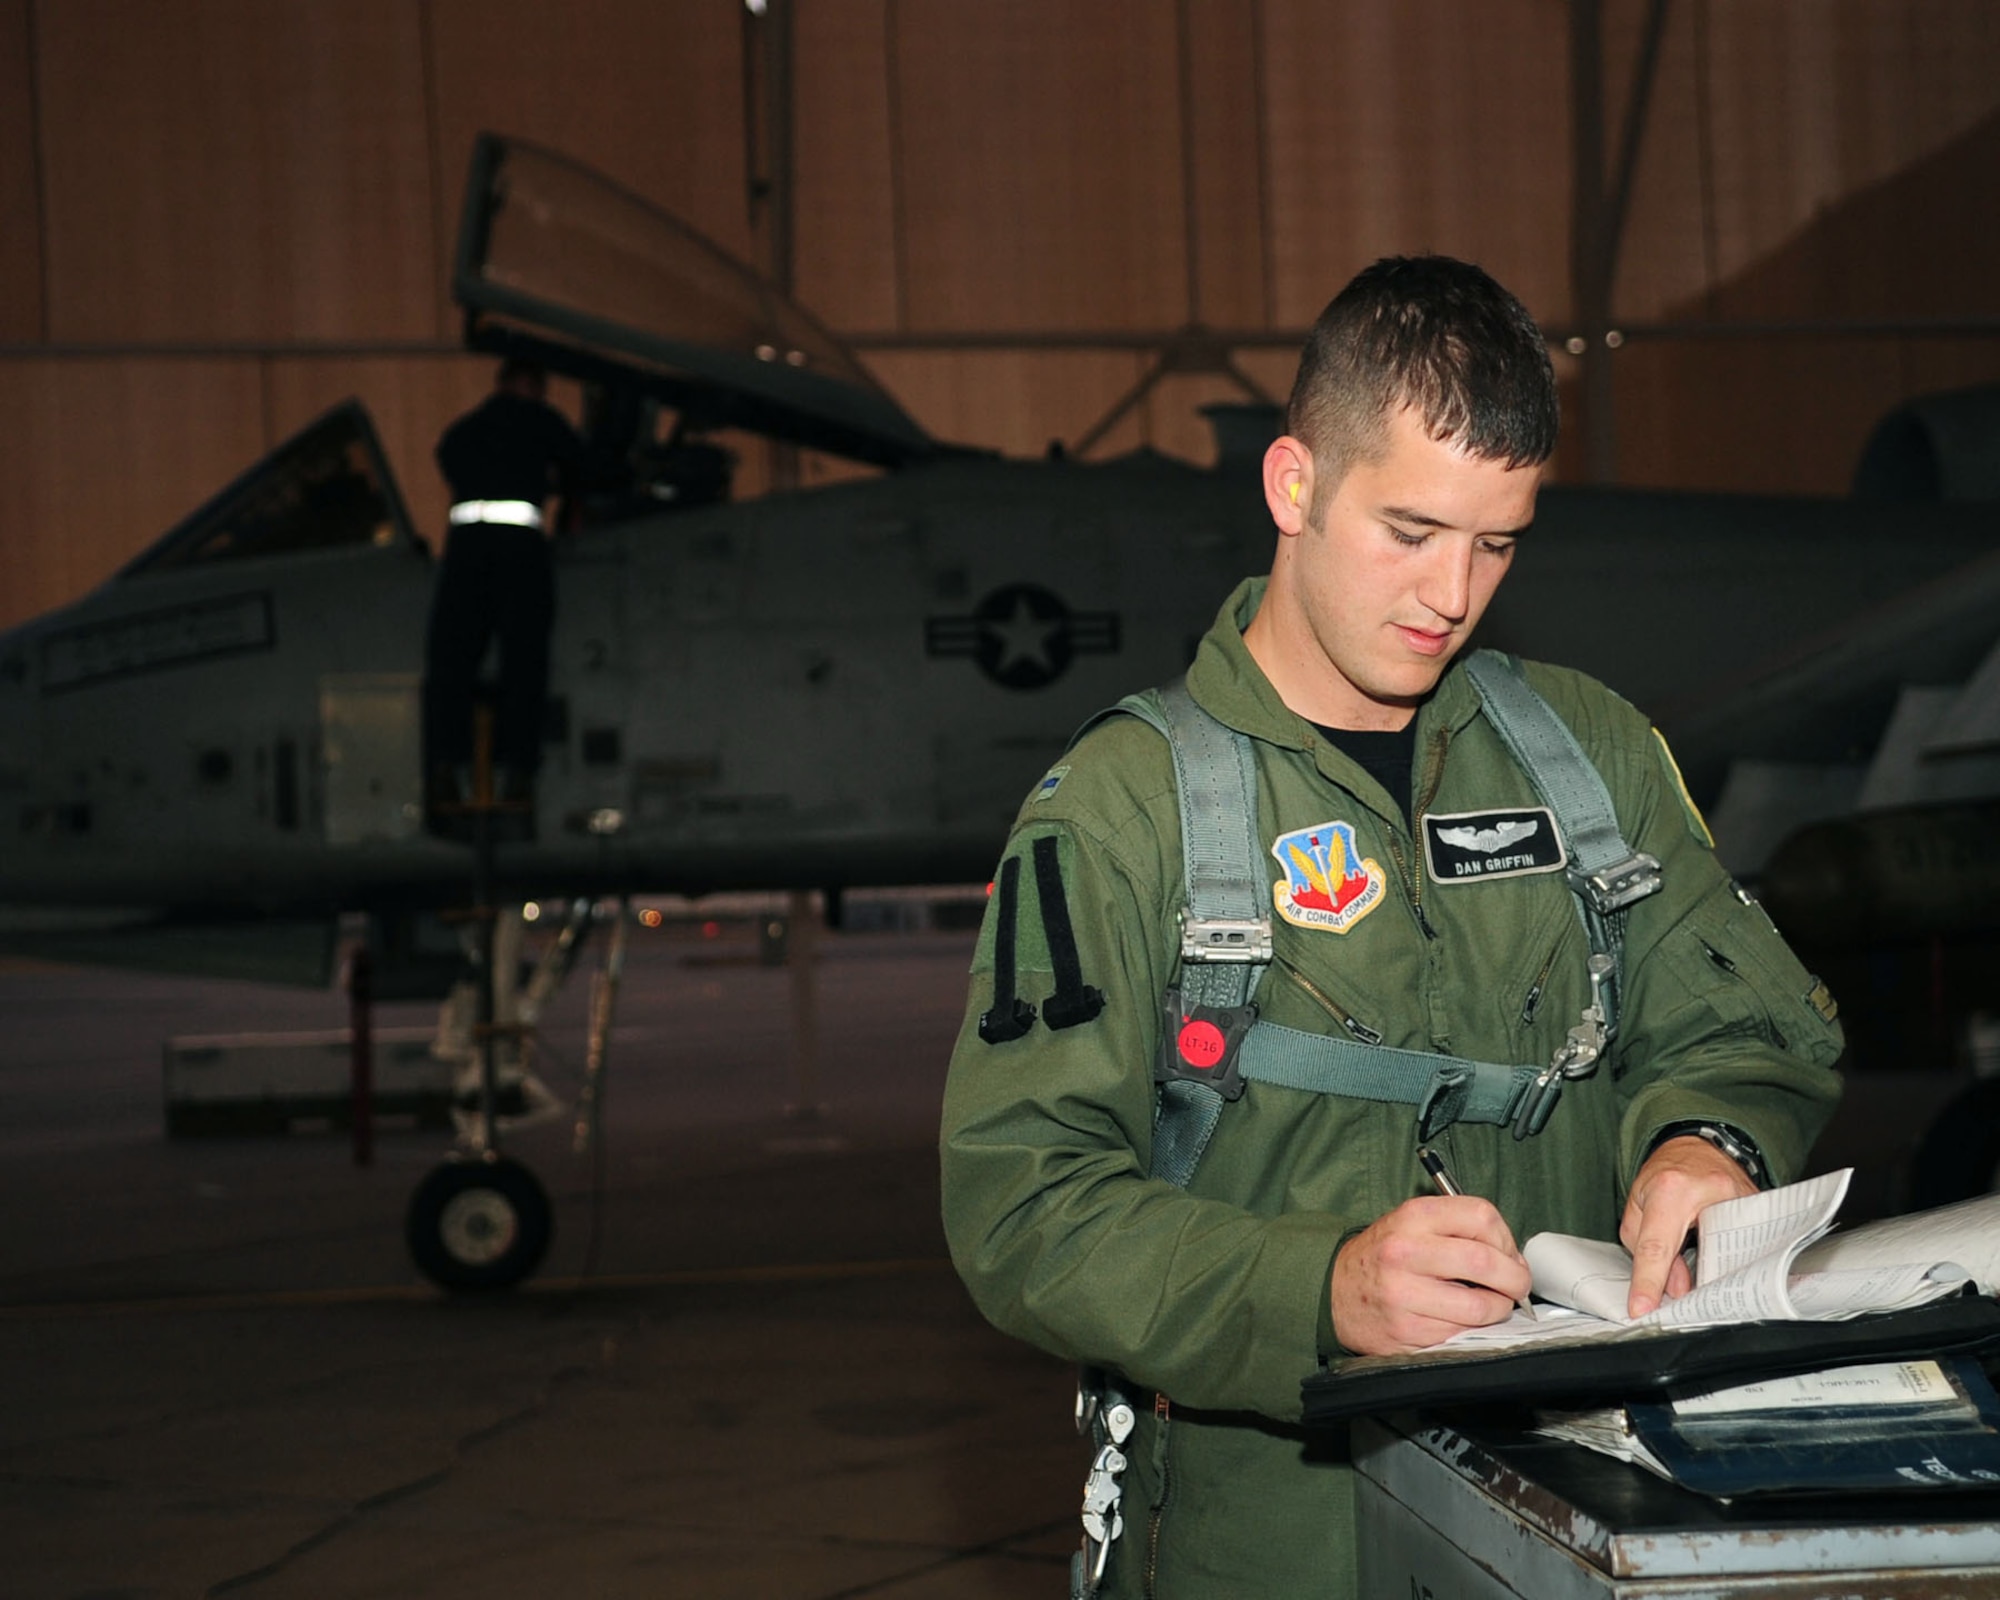 Prior to a training flight June 23, 2010, 1st Lt. Dan Griffin, a pilot from the 358th Fighter Squadron at Davis-Monthan Air Force Base, Ariz., reviews maintenance records for the A-10C Thunderbolt II he'll be flying. This was the lieutenant's second of eight night flying missions as part of the A-10C Pilot Initial Qualification course curriculum. Upon completion of this course he will be a fully qualified A-10C pilot. (U.S. Air Force photo/Airman 1st Class Jerilyn Quintanilla)